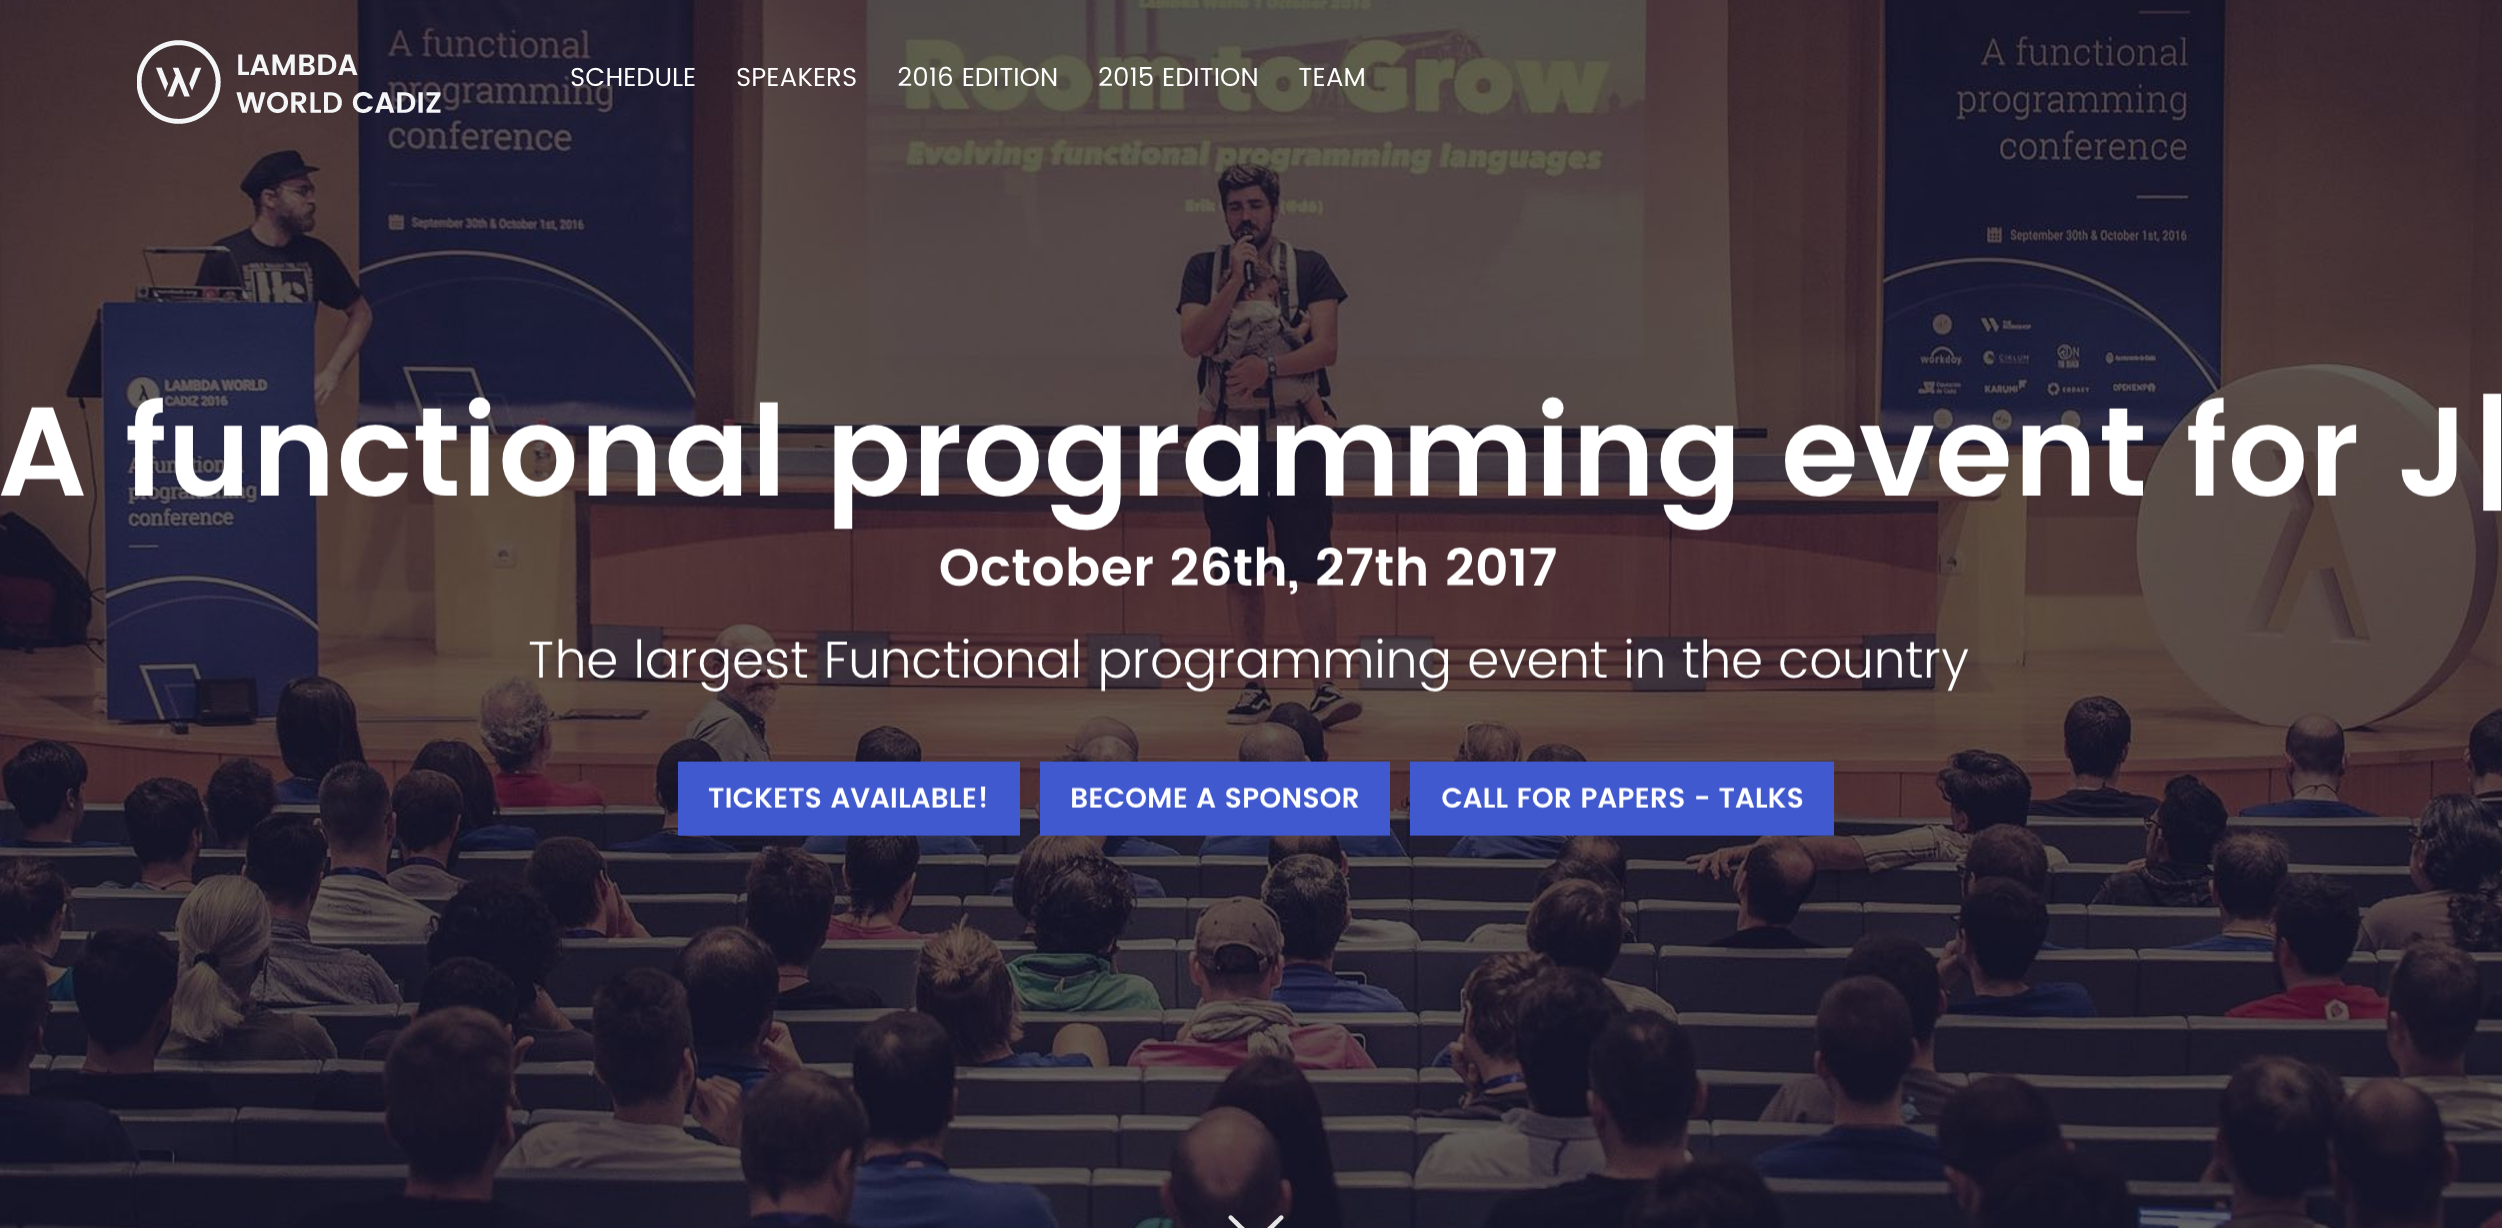 Becoming a functional programmer thanks to Lambda World